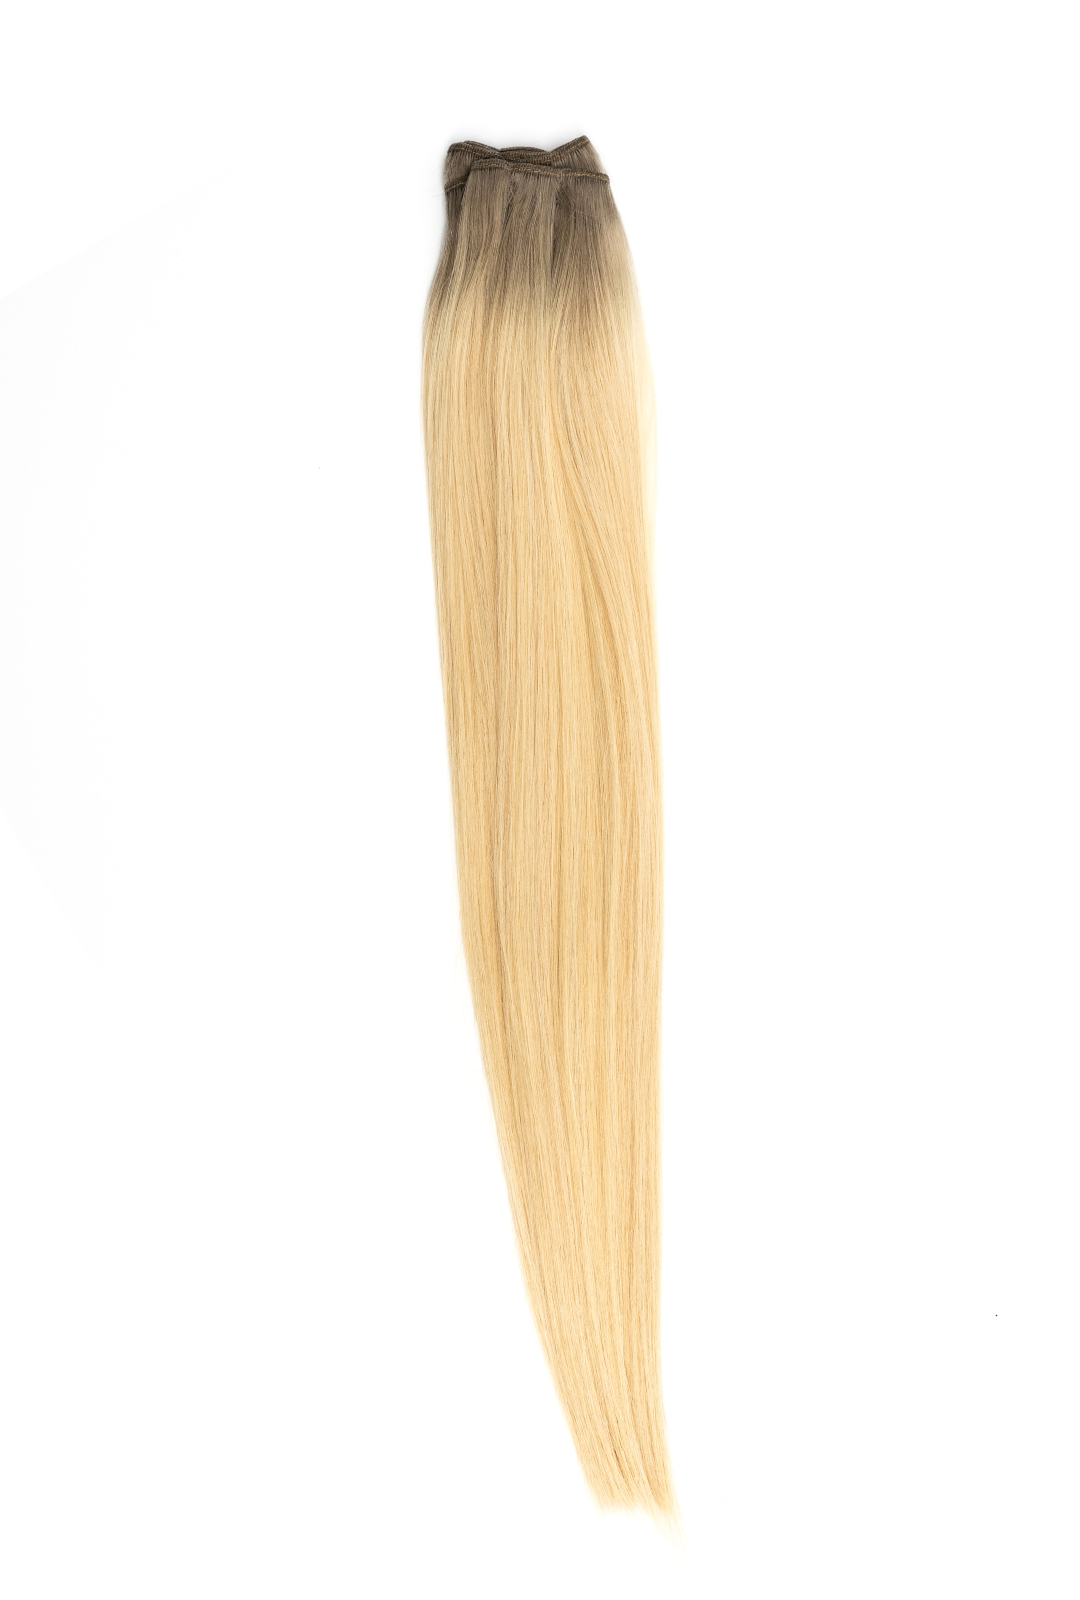 Laced Hair Hand Tied Weft Extensions Rooted #8/D16/22 (Rooted Buttercream)